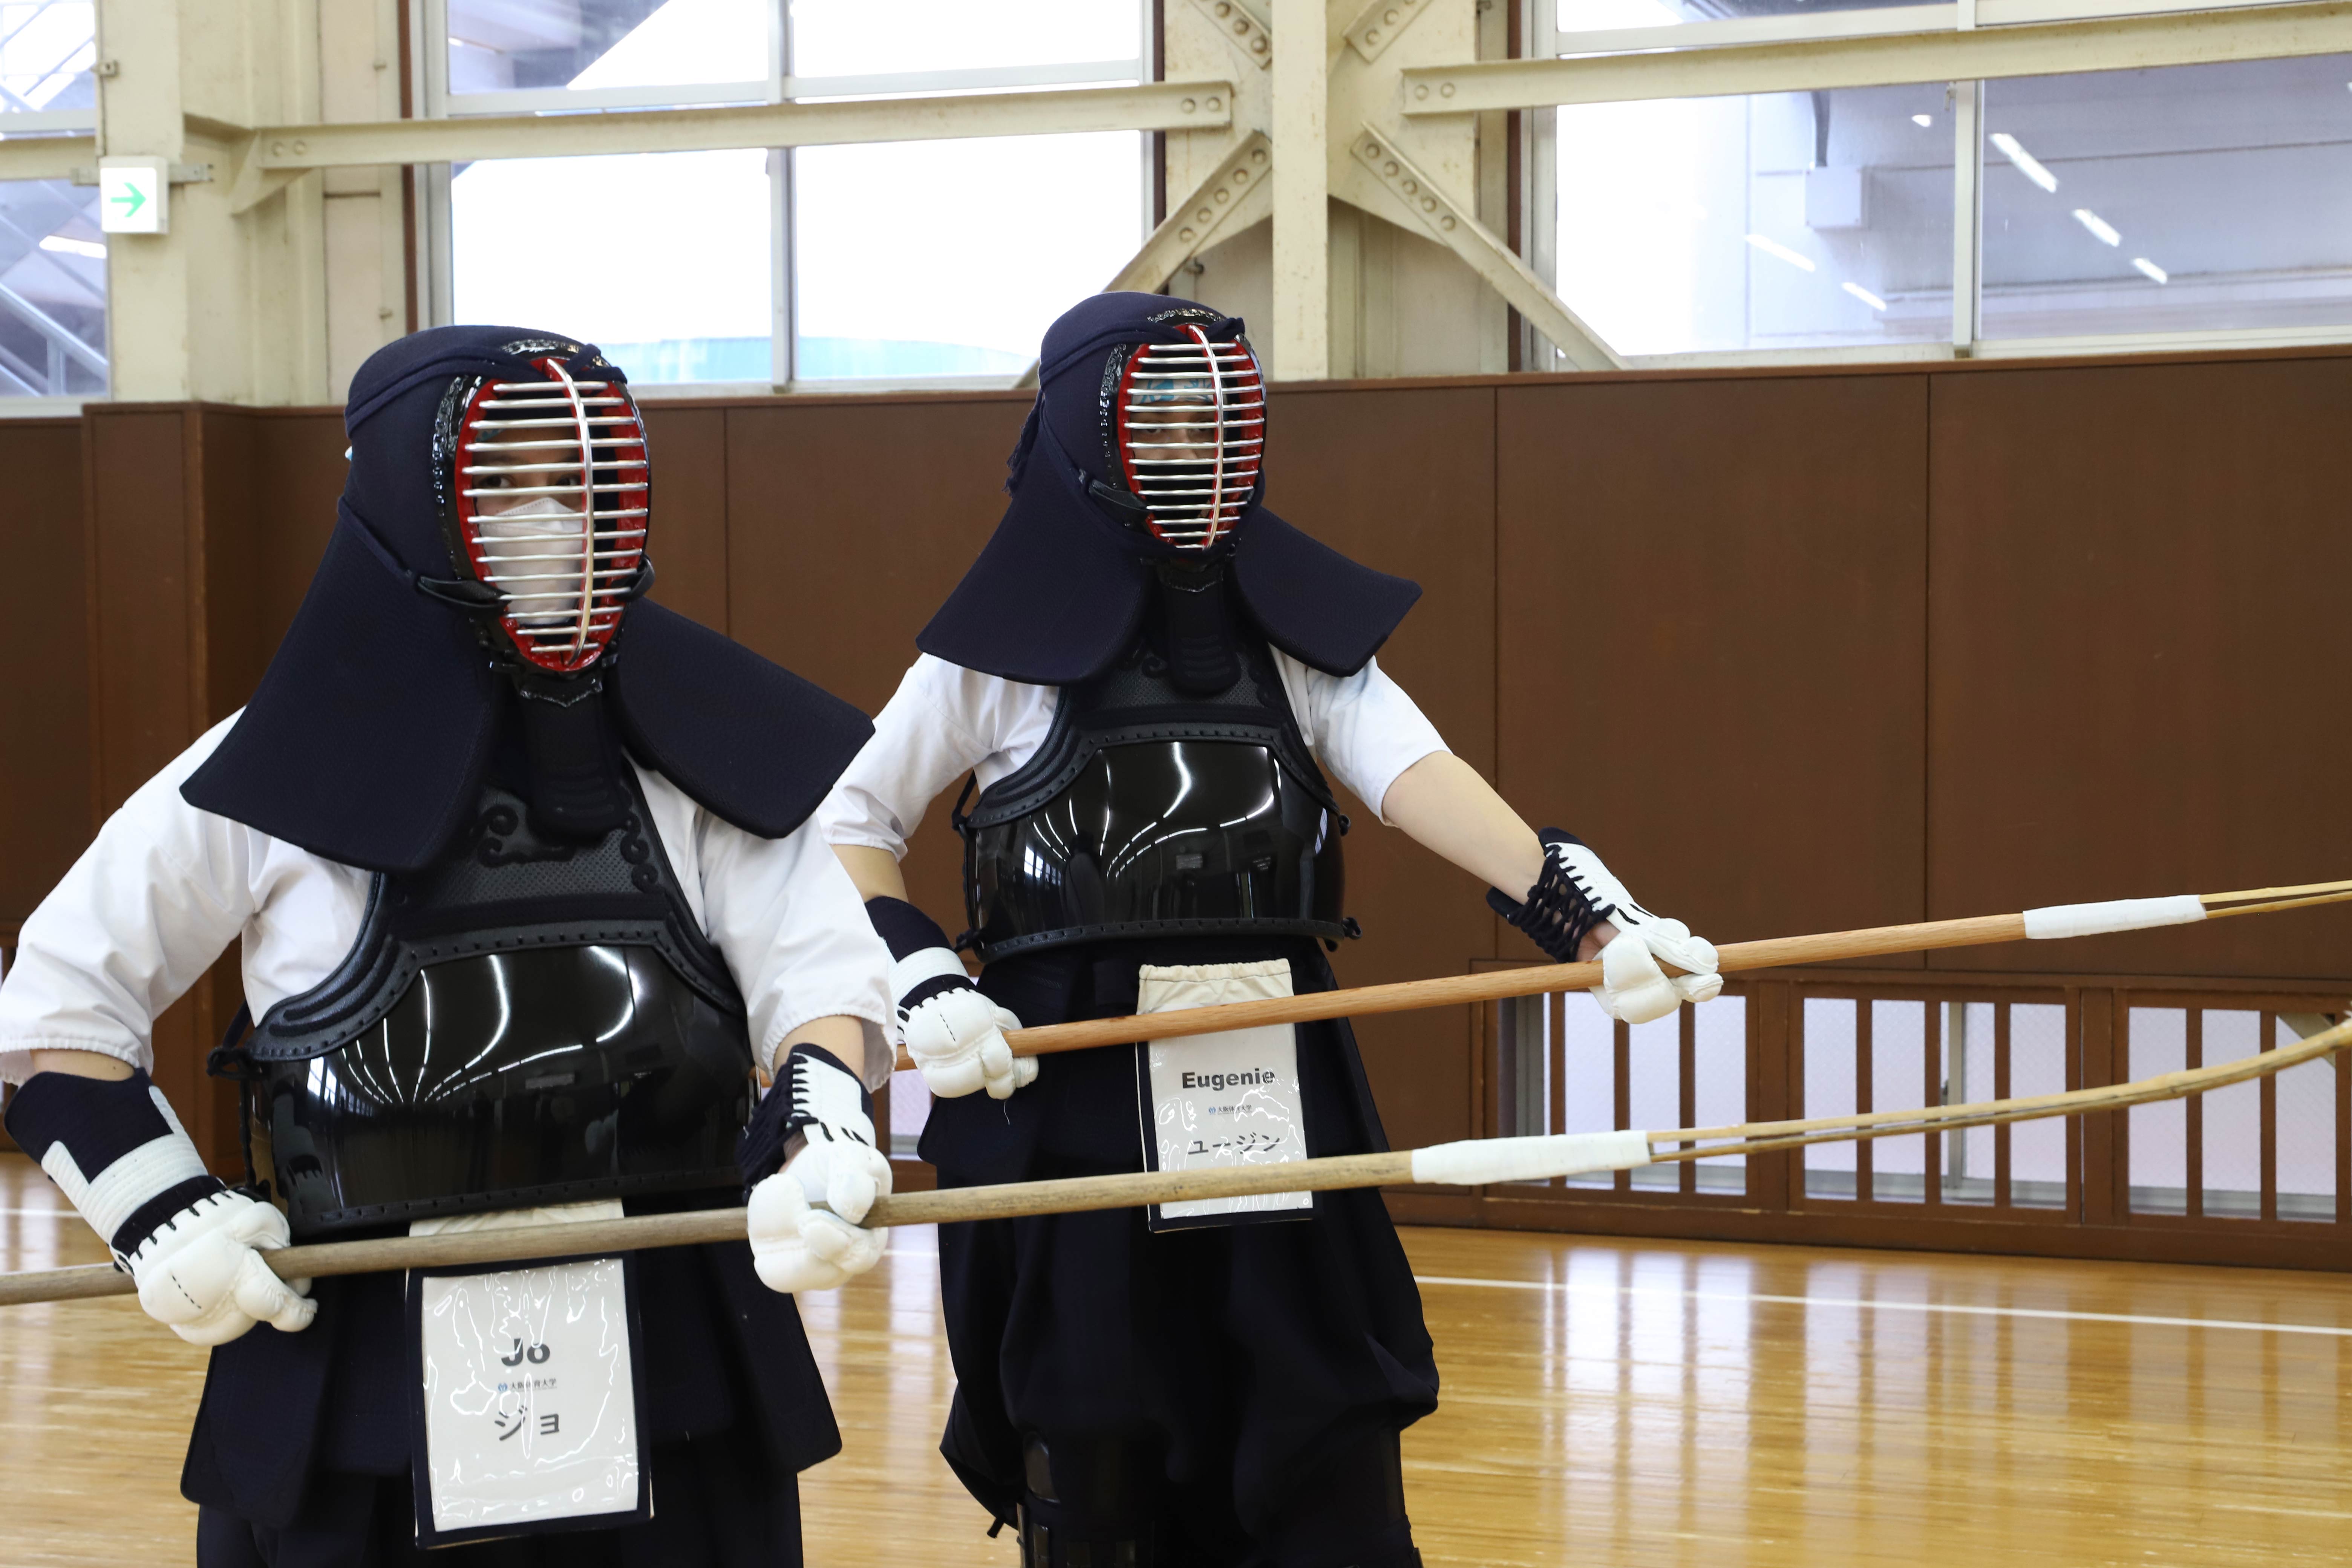 Experience martial arts with an over-two-meter long naginata halberd